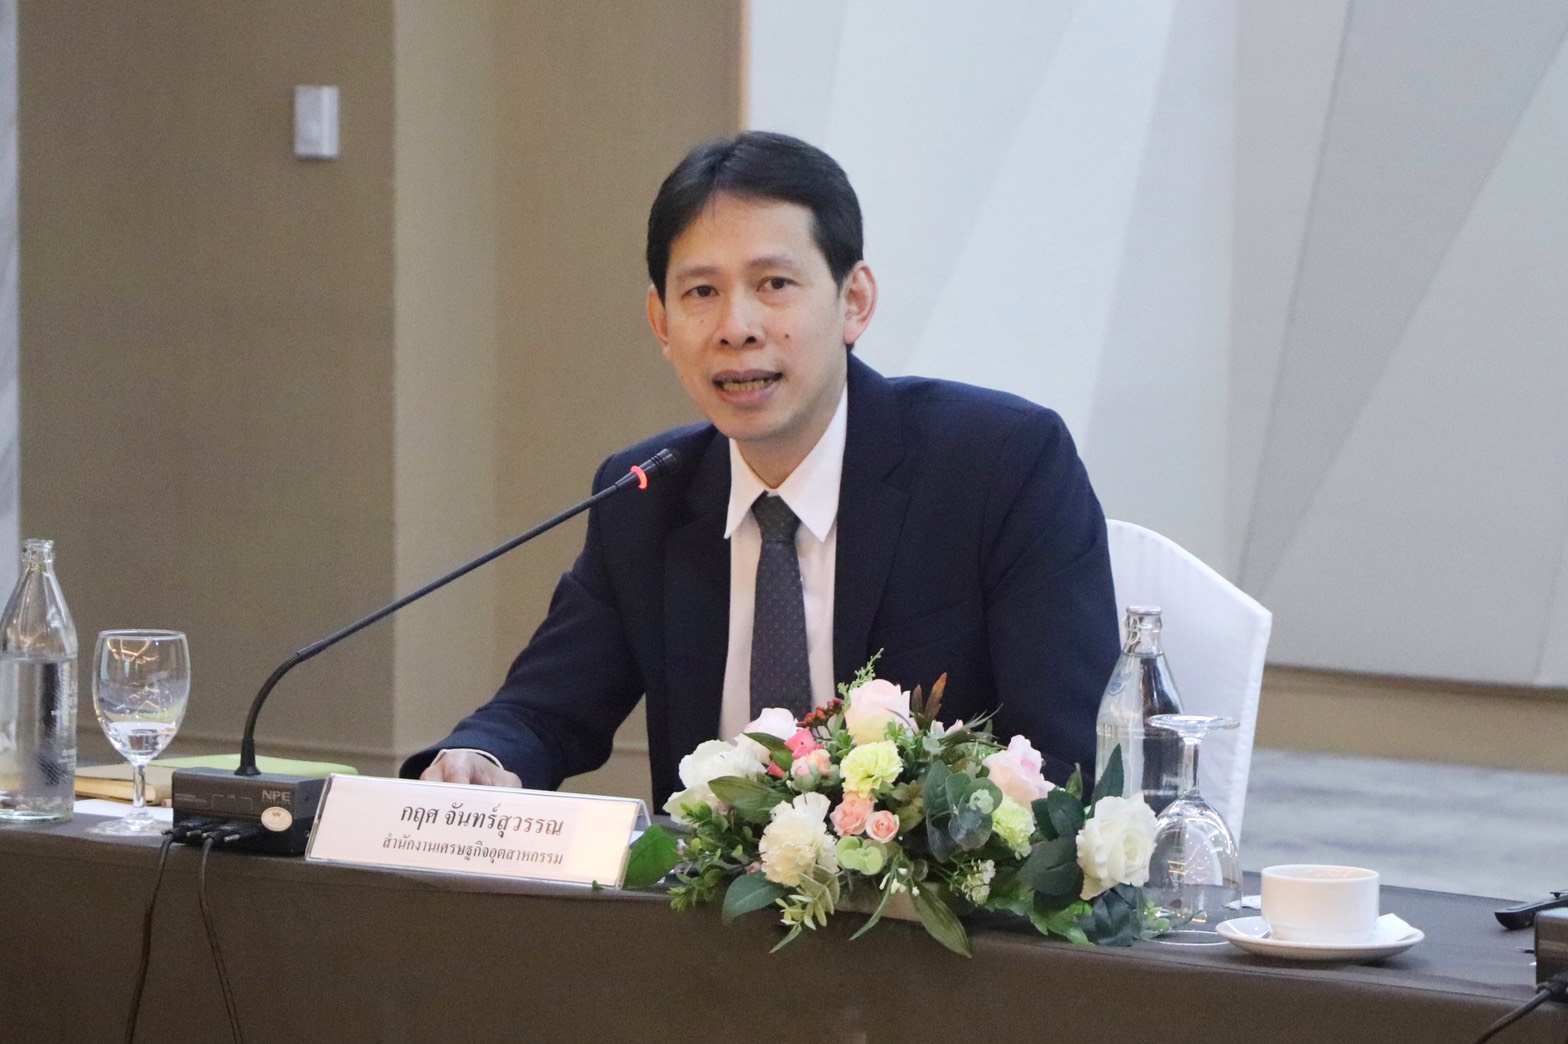 To Highlight the Issues and Prospects of the Textile and Garment Sector for Strong Adaptation in the Future, a Focus Group Online Discussion (Zoom) on “Moving Forward with Thai Textile Businesses” Was